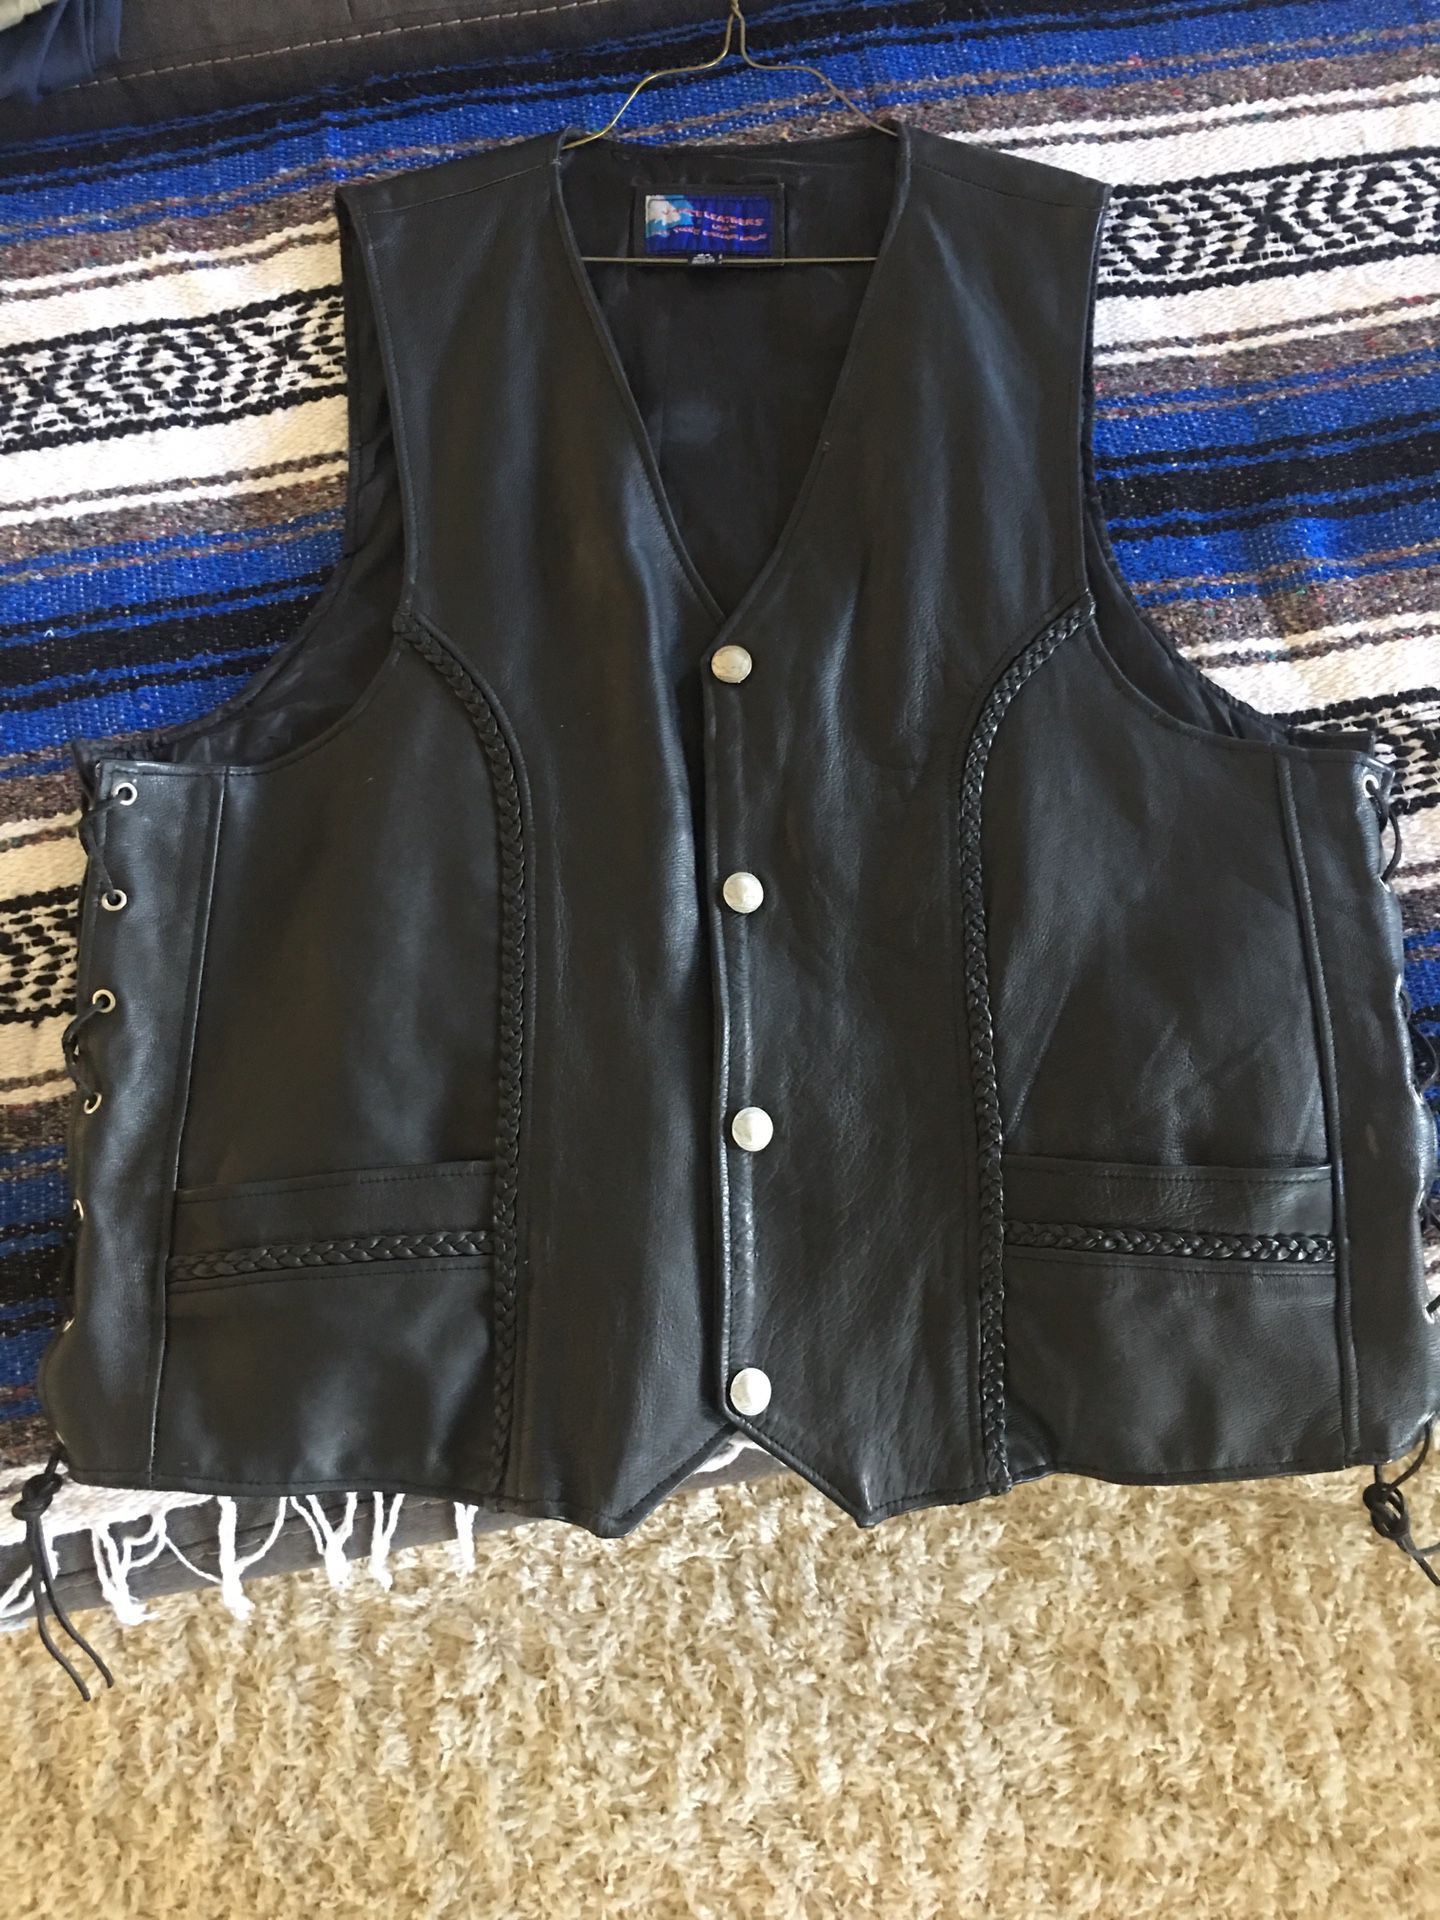 Vance Leather motorcycle vest. Brand New Never Worn. 